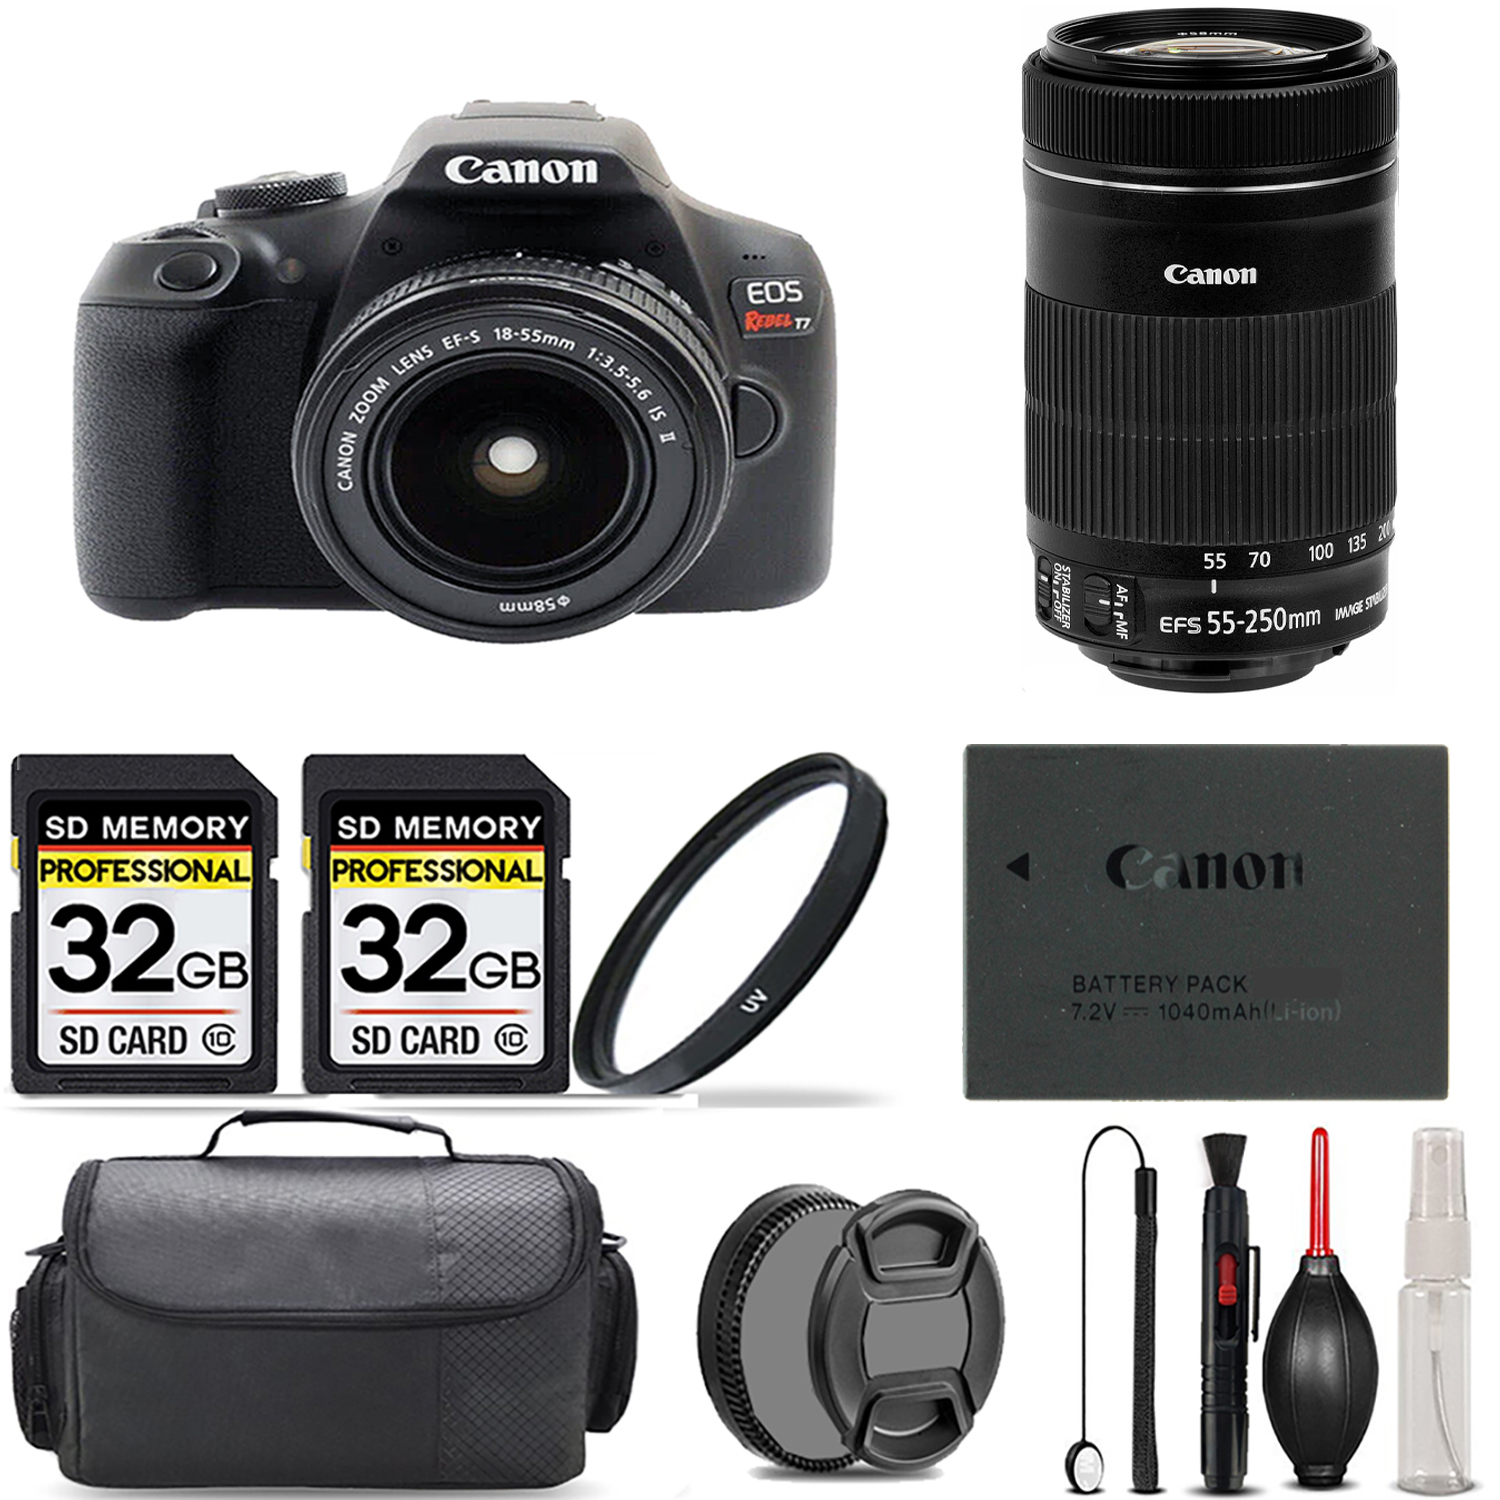 EOS Rebel T7 with 18-55mm Lens + 55-250mm IS STM Lens + UV Filter + 64GB + Bag *FREE SHIPPING*